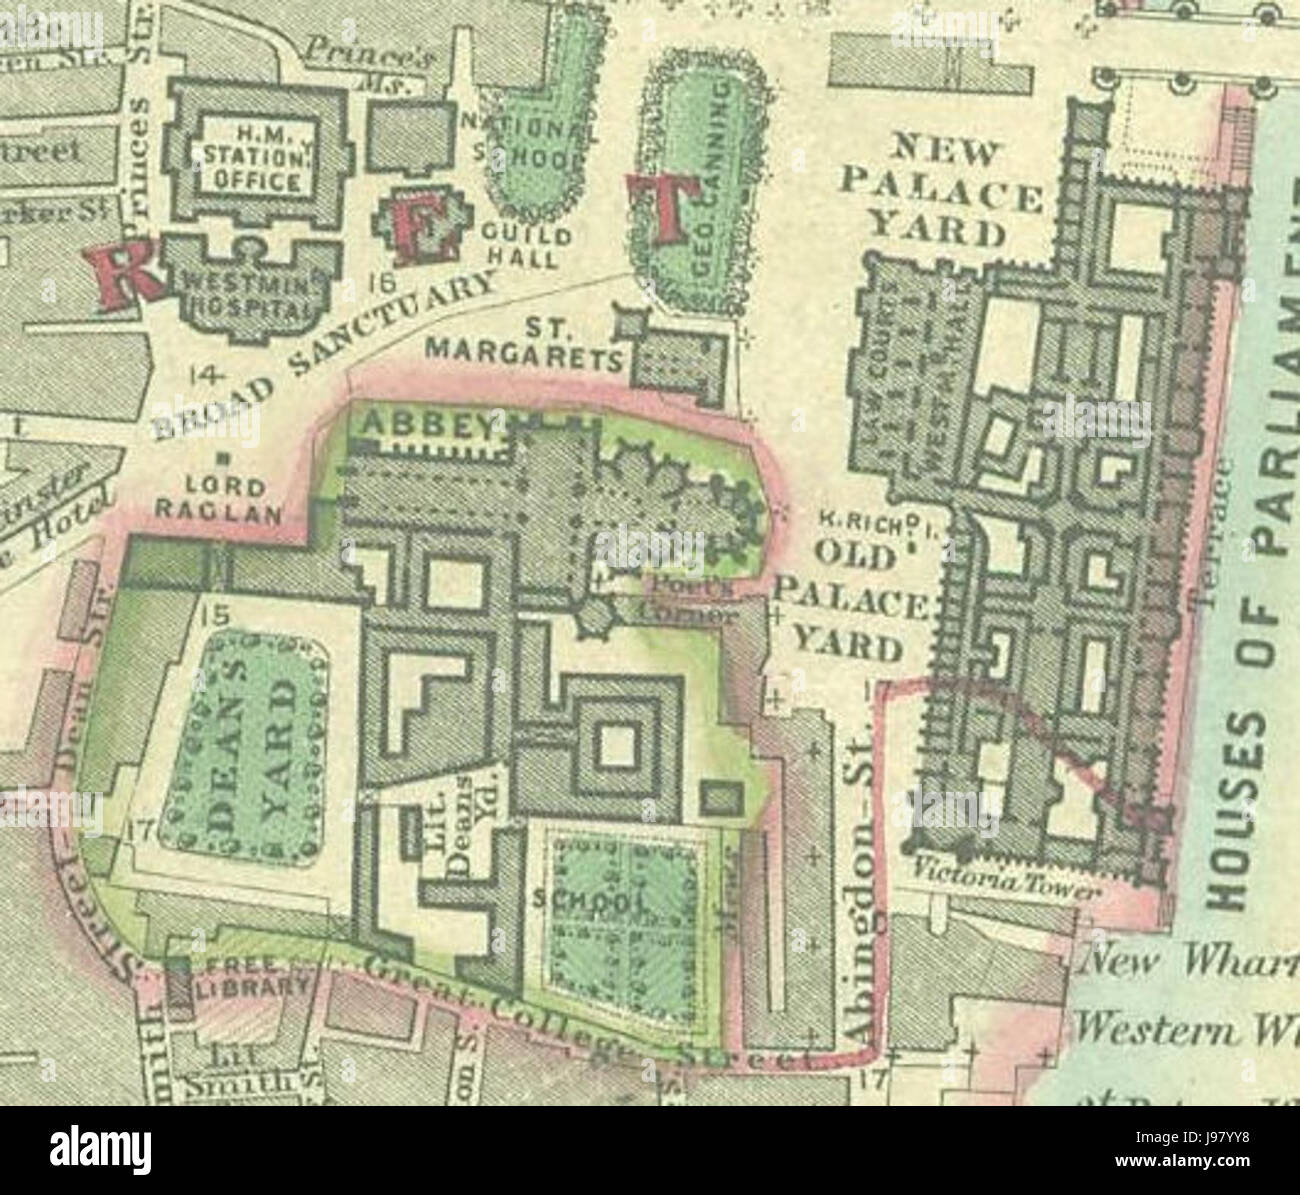 Westminster Hospital location   Stanford map of London 1862 Stock Photo